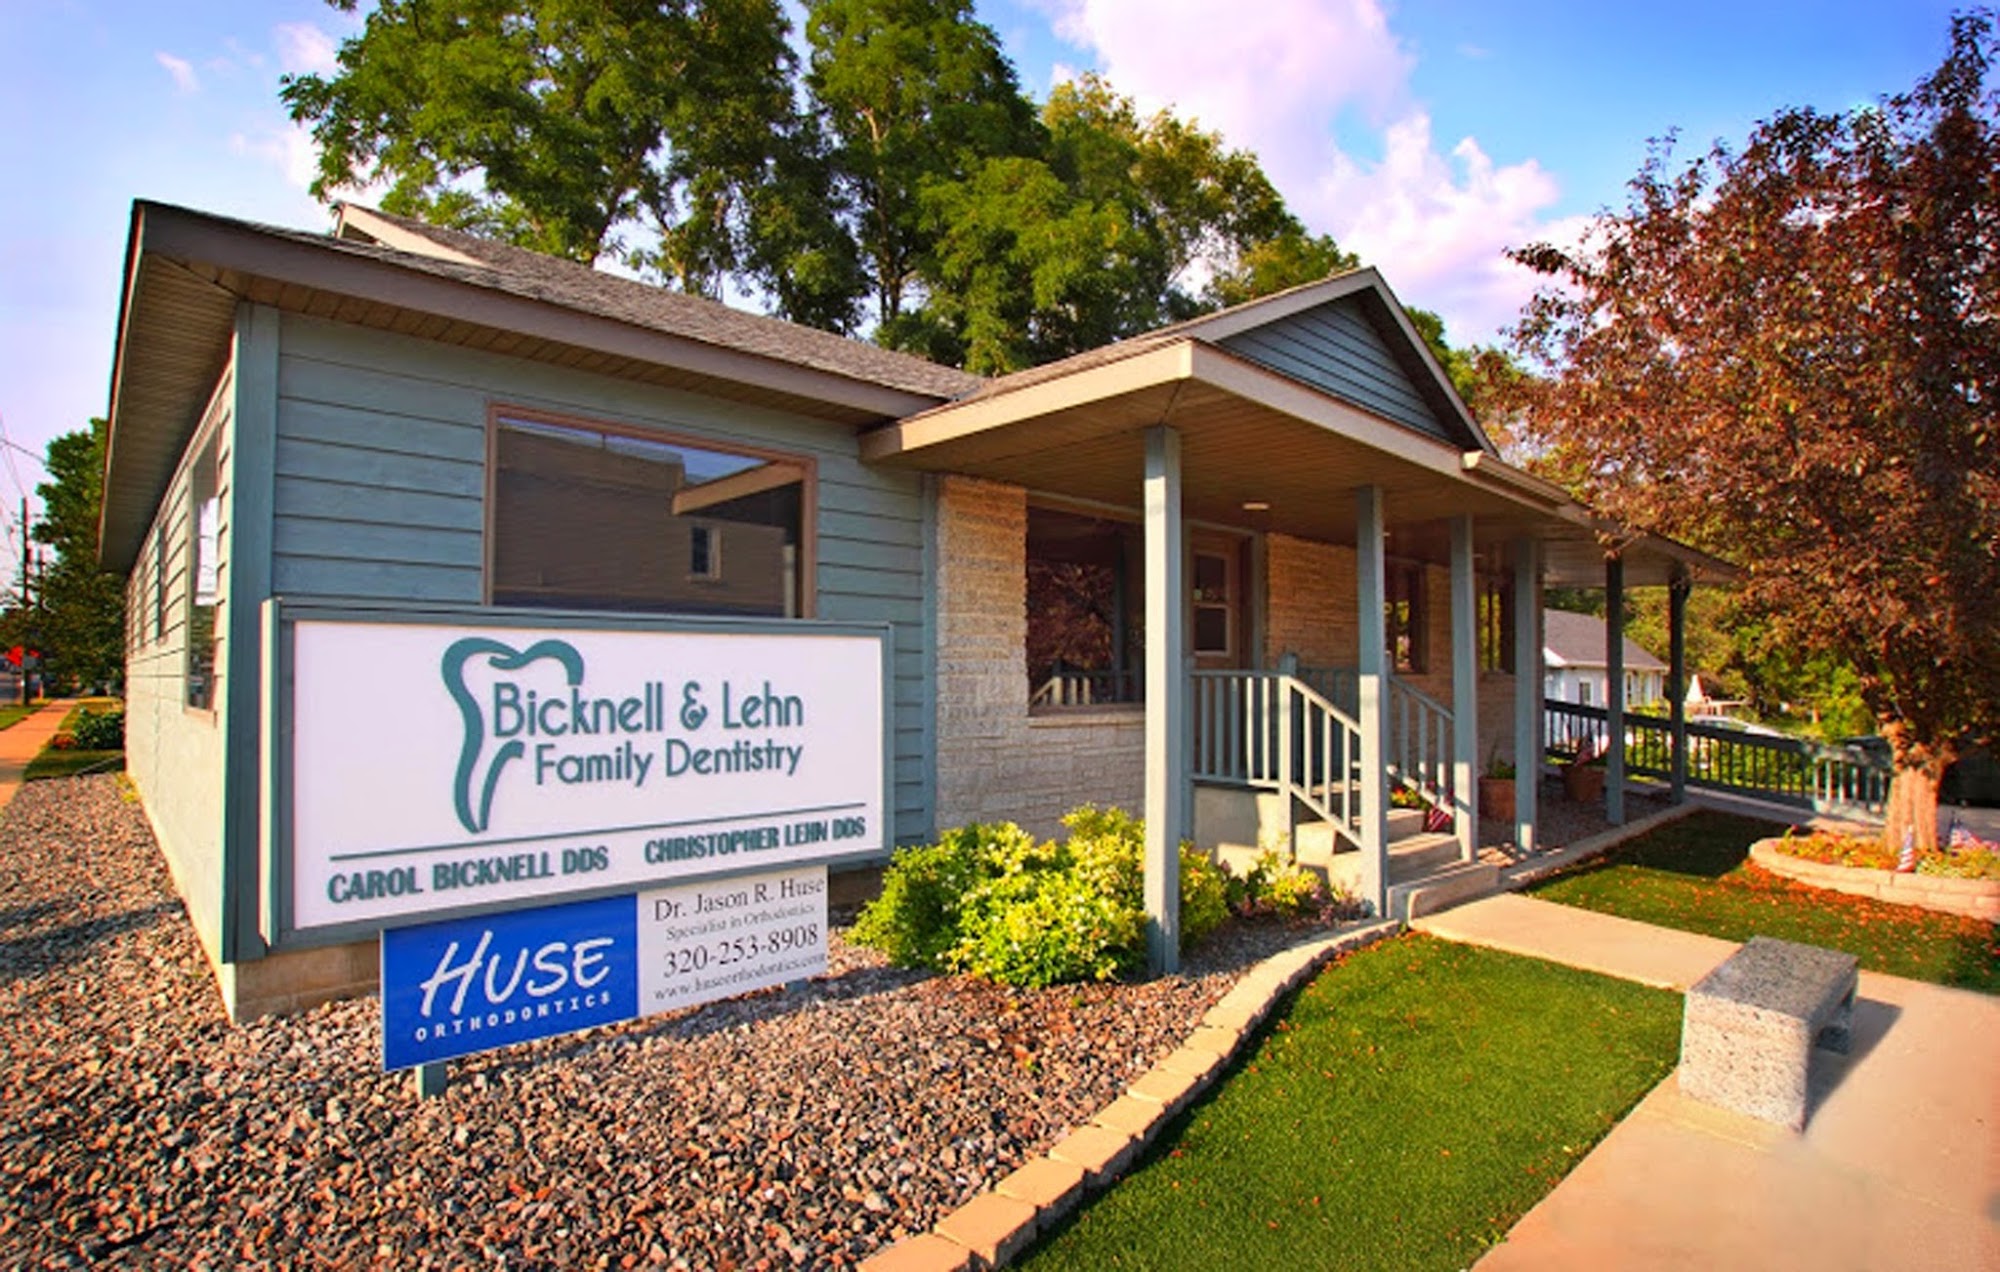 Bicknell and Lehn Family Dentistry 311 1st St N, Cold Spring Minnesota 56320